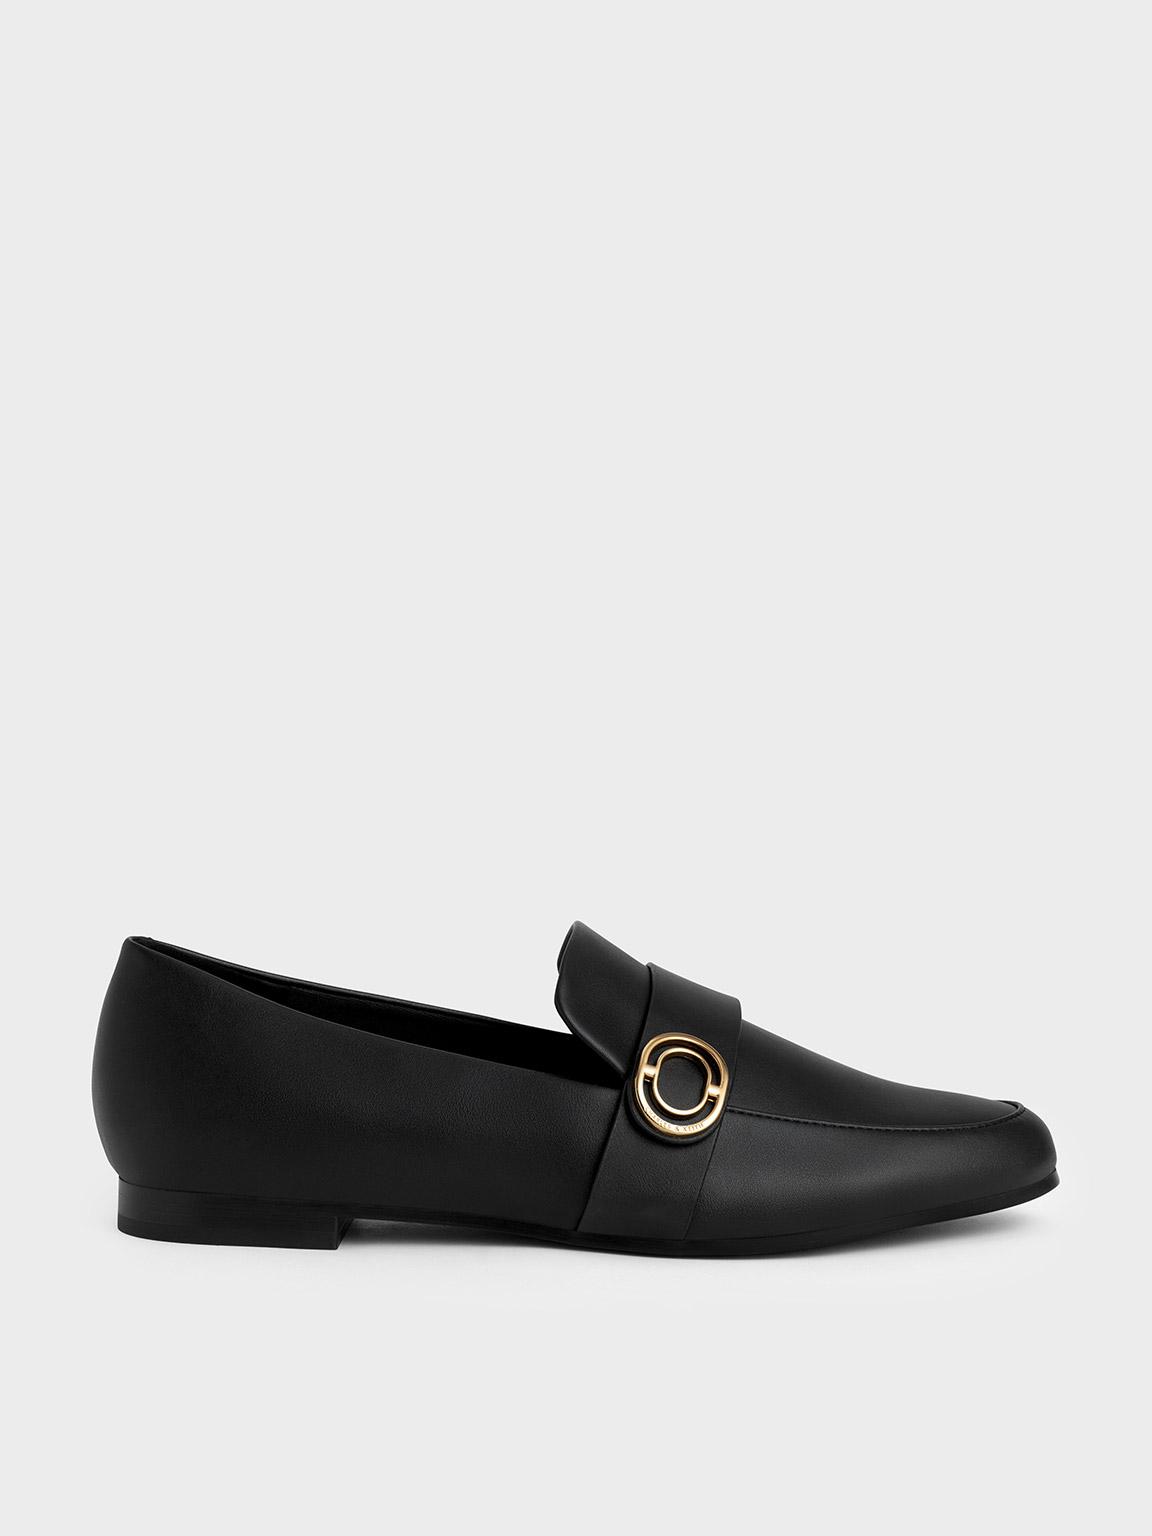 Charles & Keith Velvet Metallic Accent Almond-toe Penny Loafers in ...